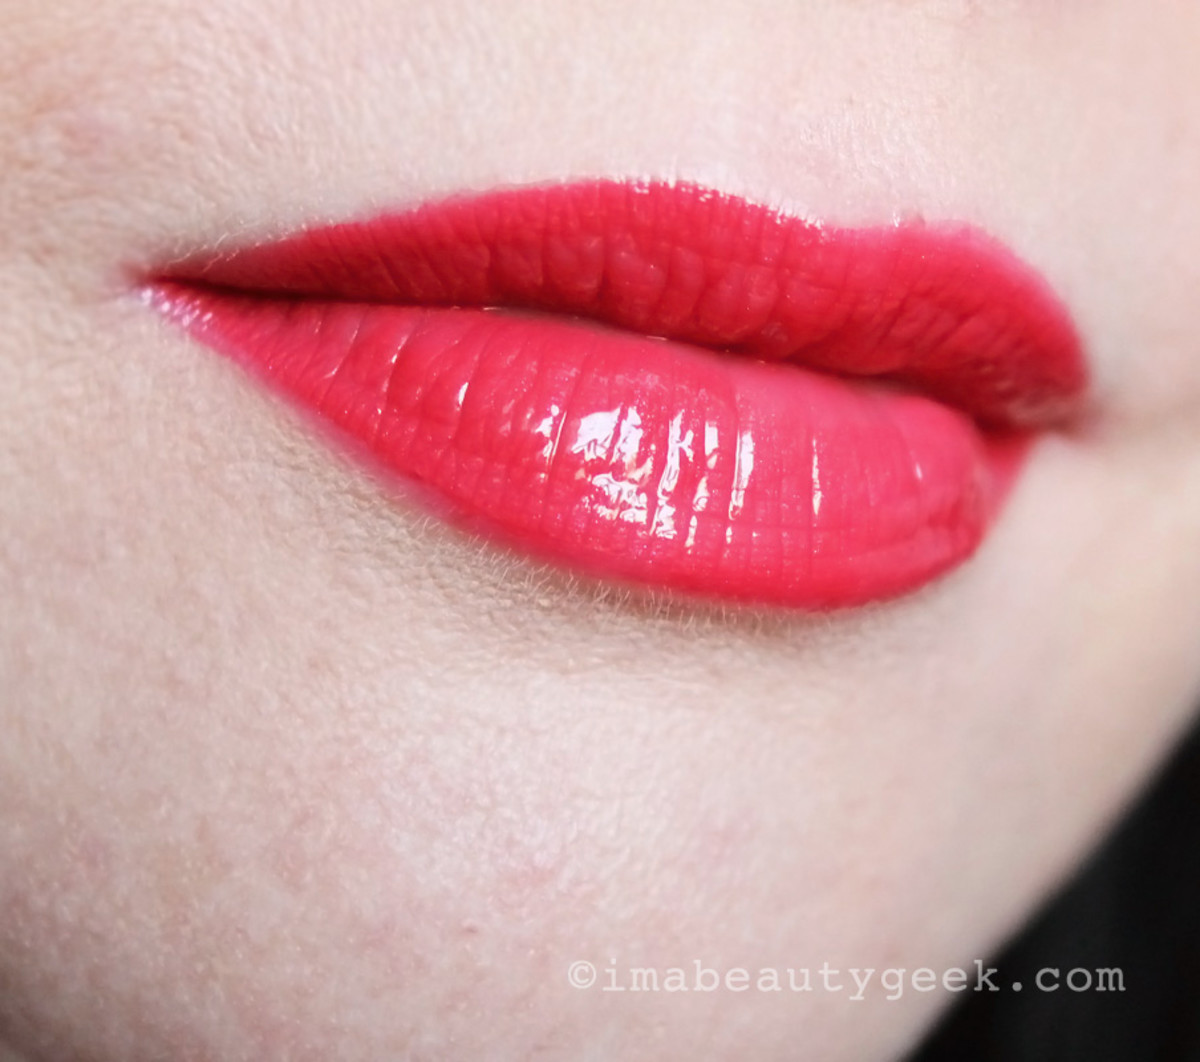 LIPSTICK DIARY: WHAT I WORE THAT DAY - Beautygeeks